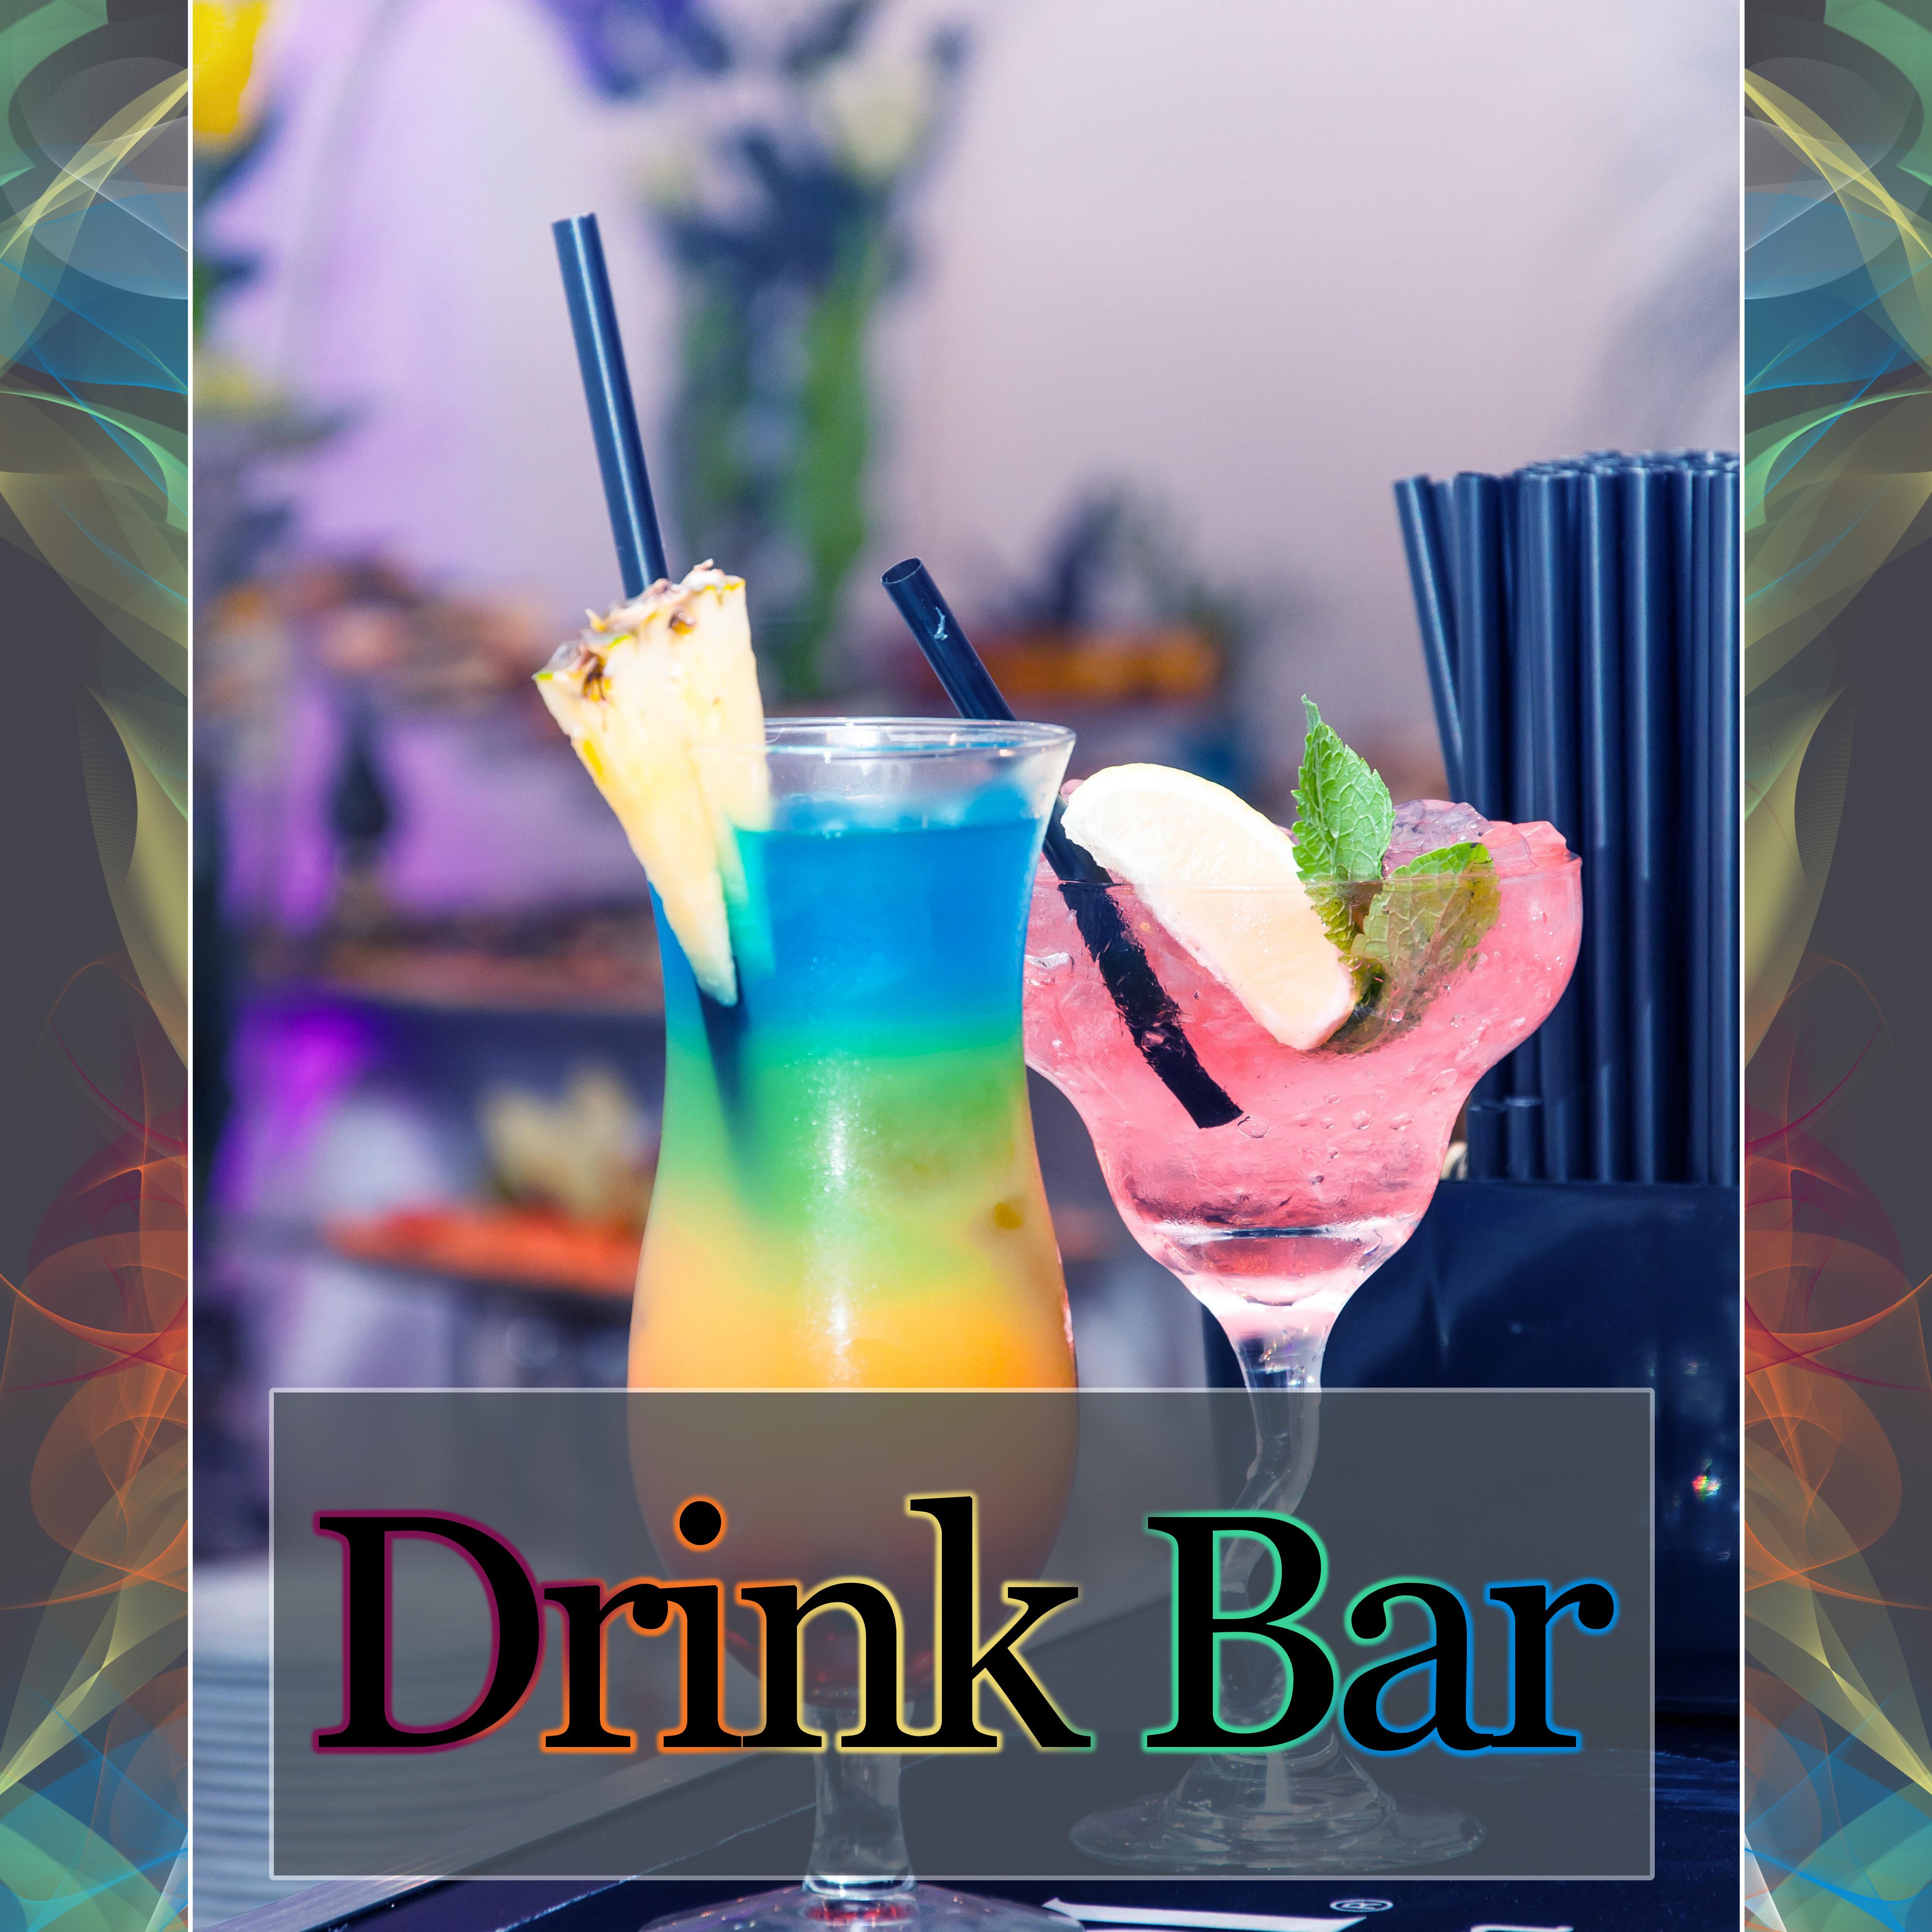 Drink Bar - Pianobar Instrumental for Dinner Time, Romantic Piano Background Music, Jazz Cafe Bar